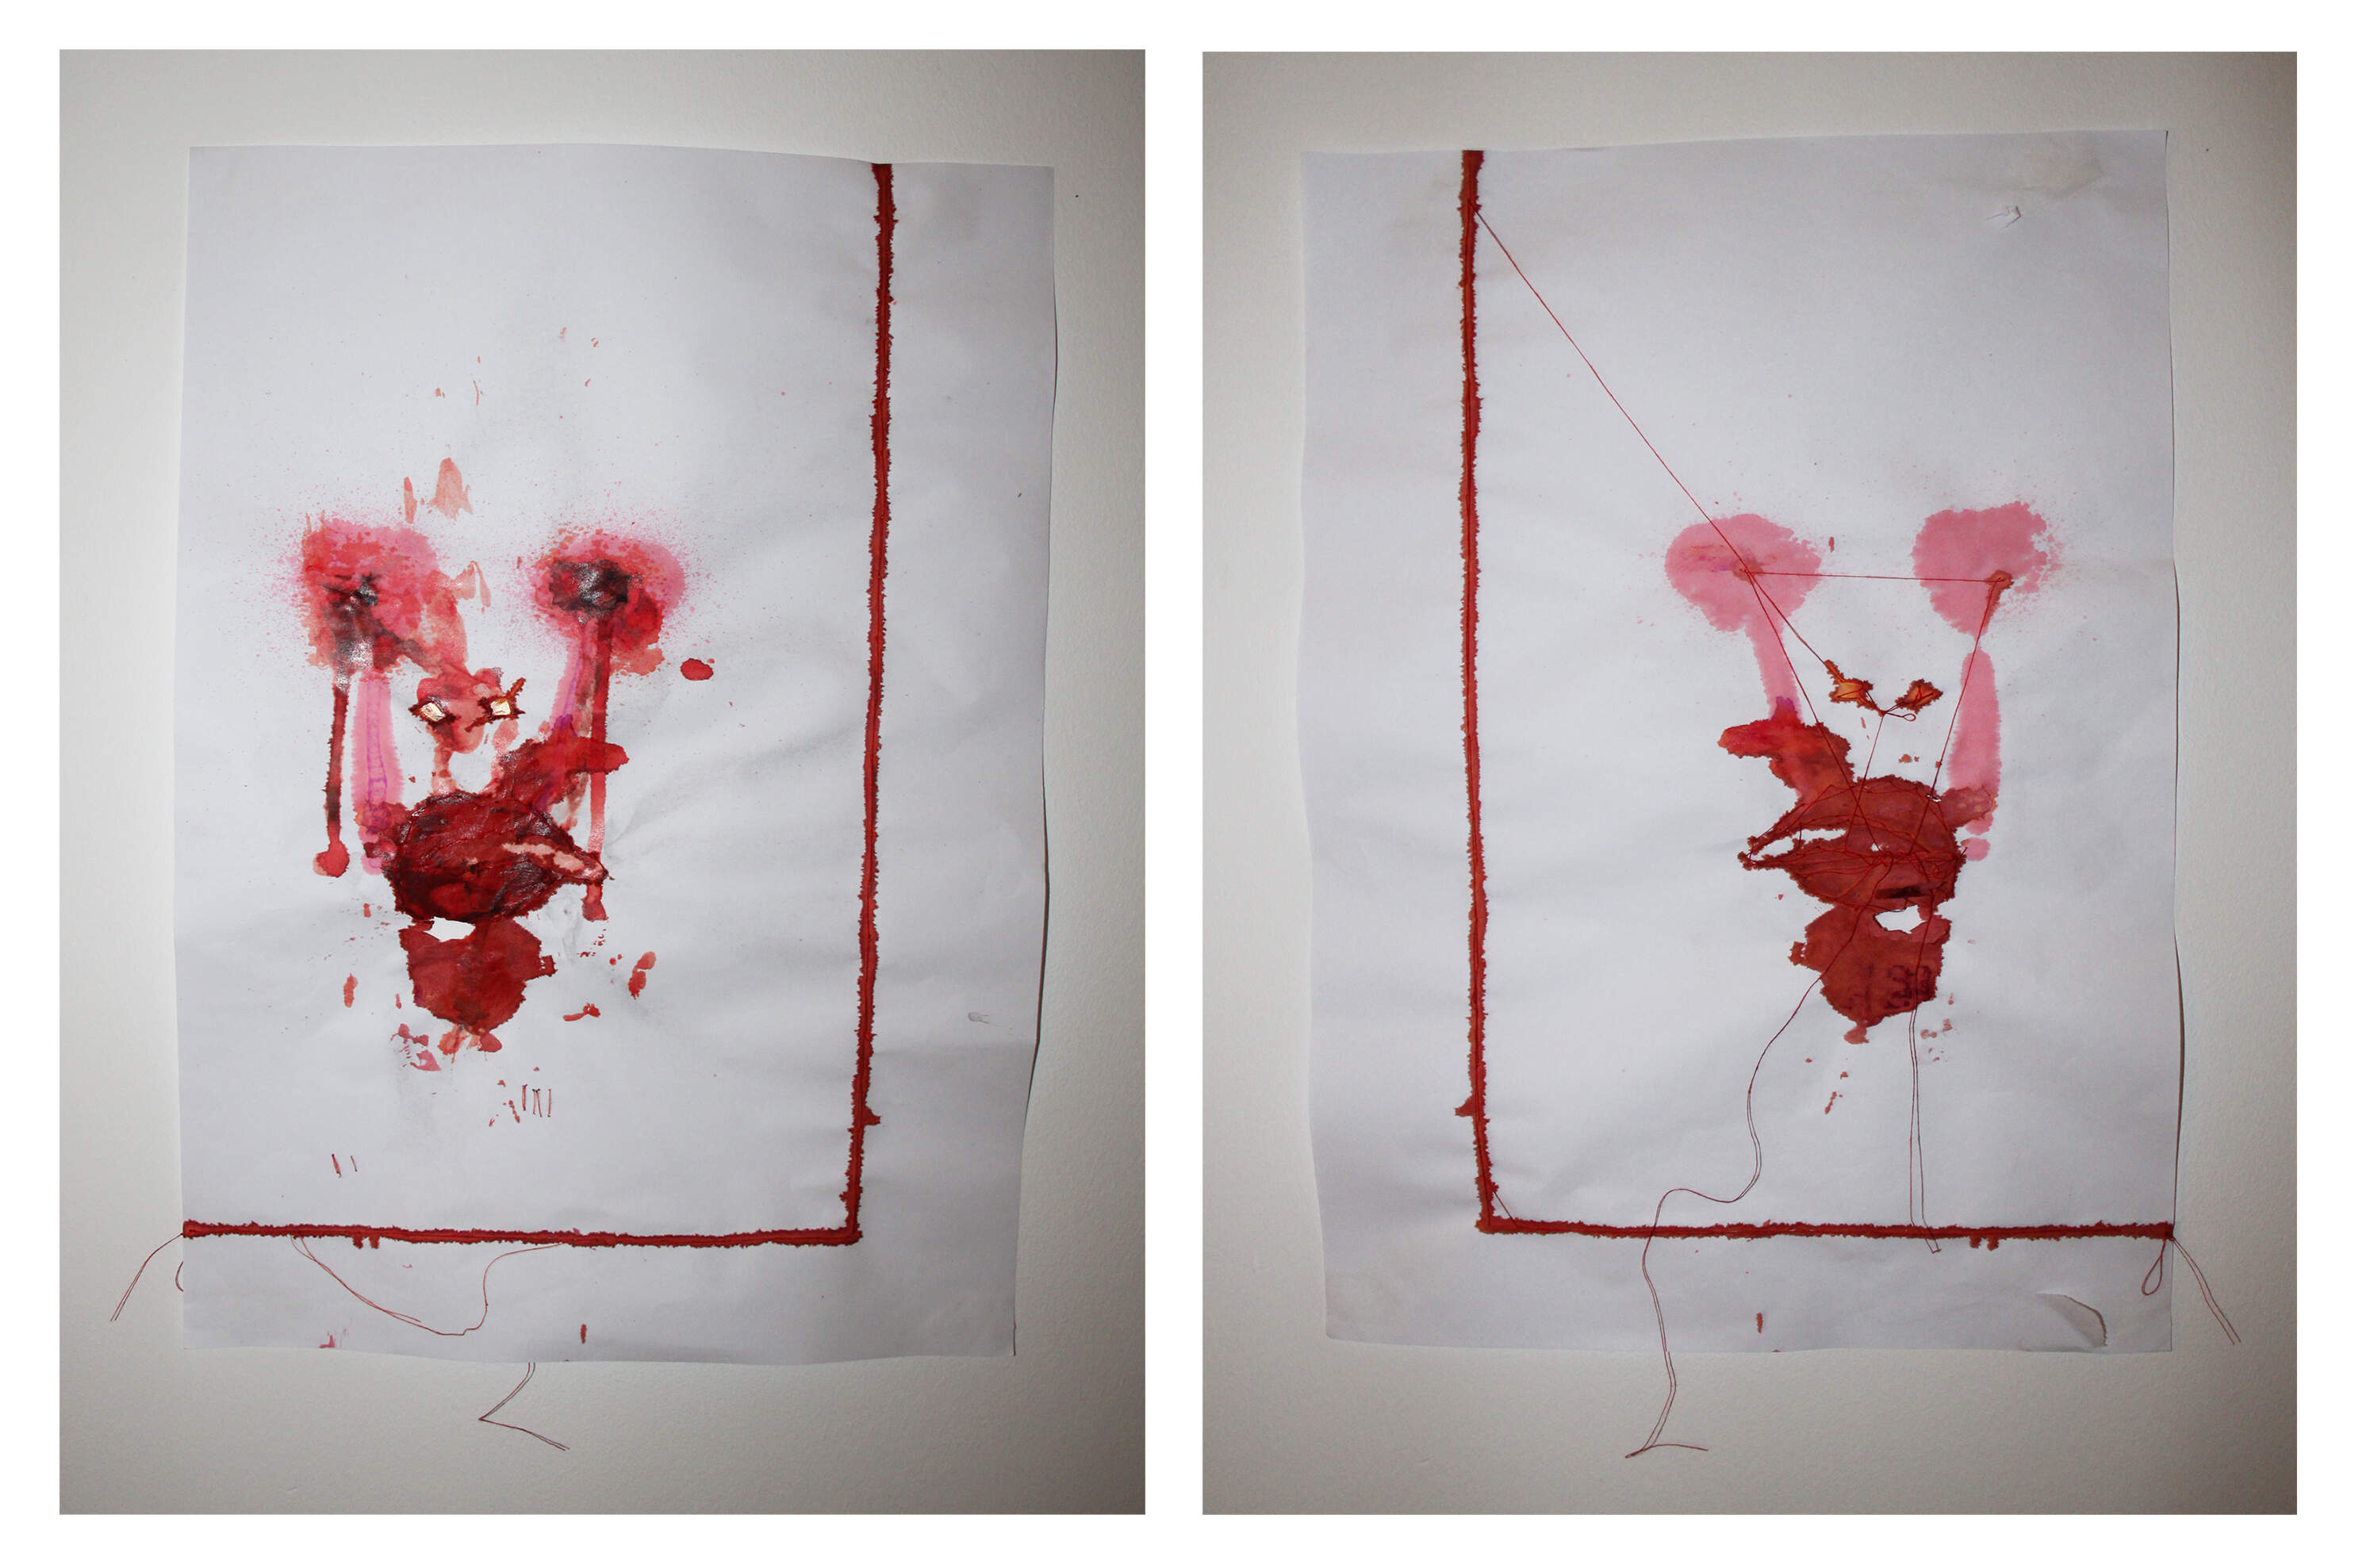 A3 front and back of an abstracted portrait using red inks and threads